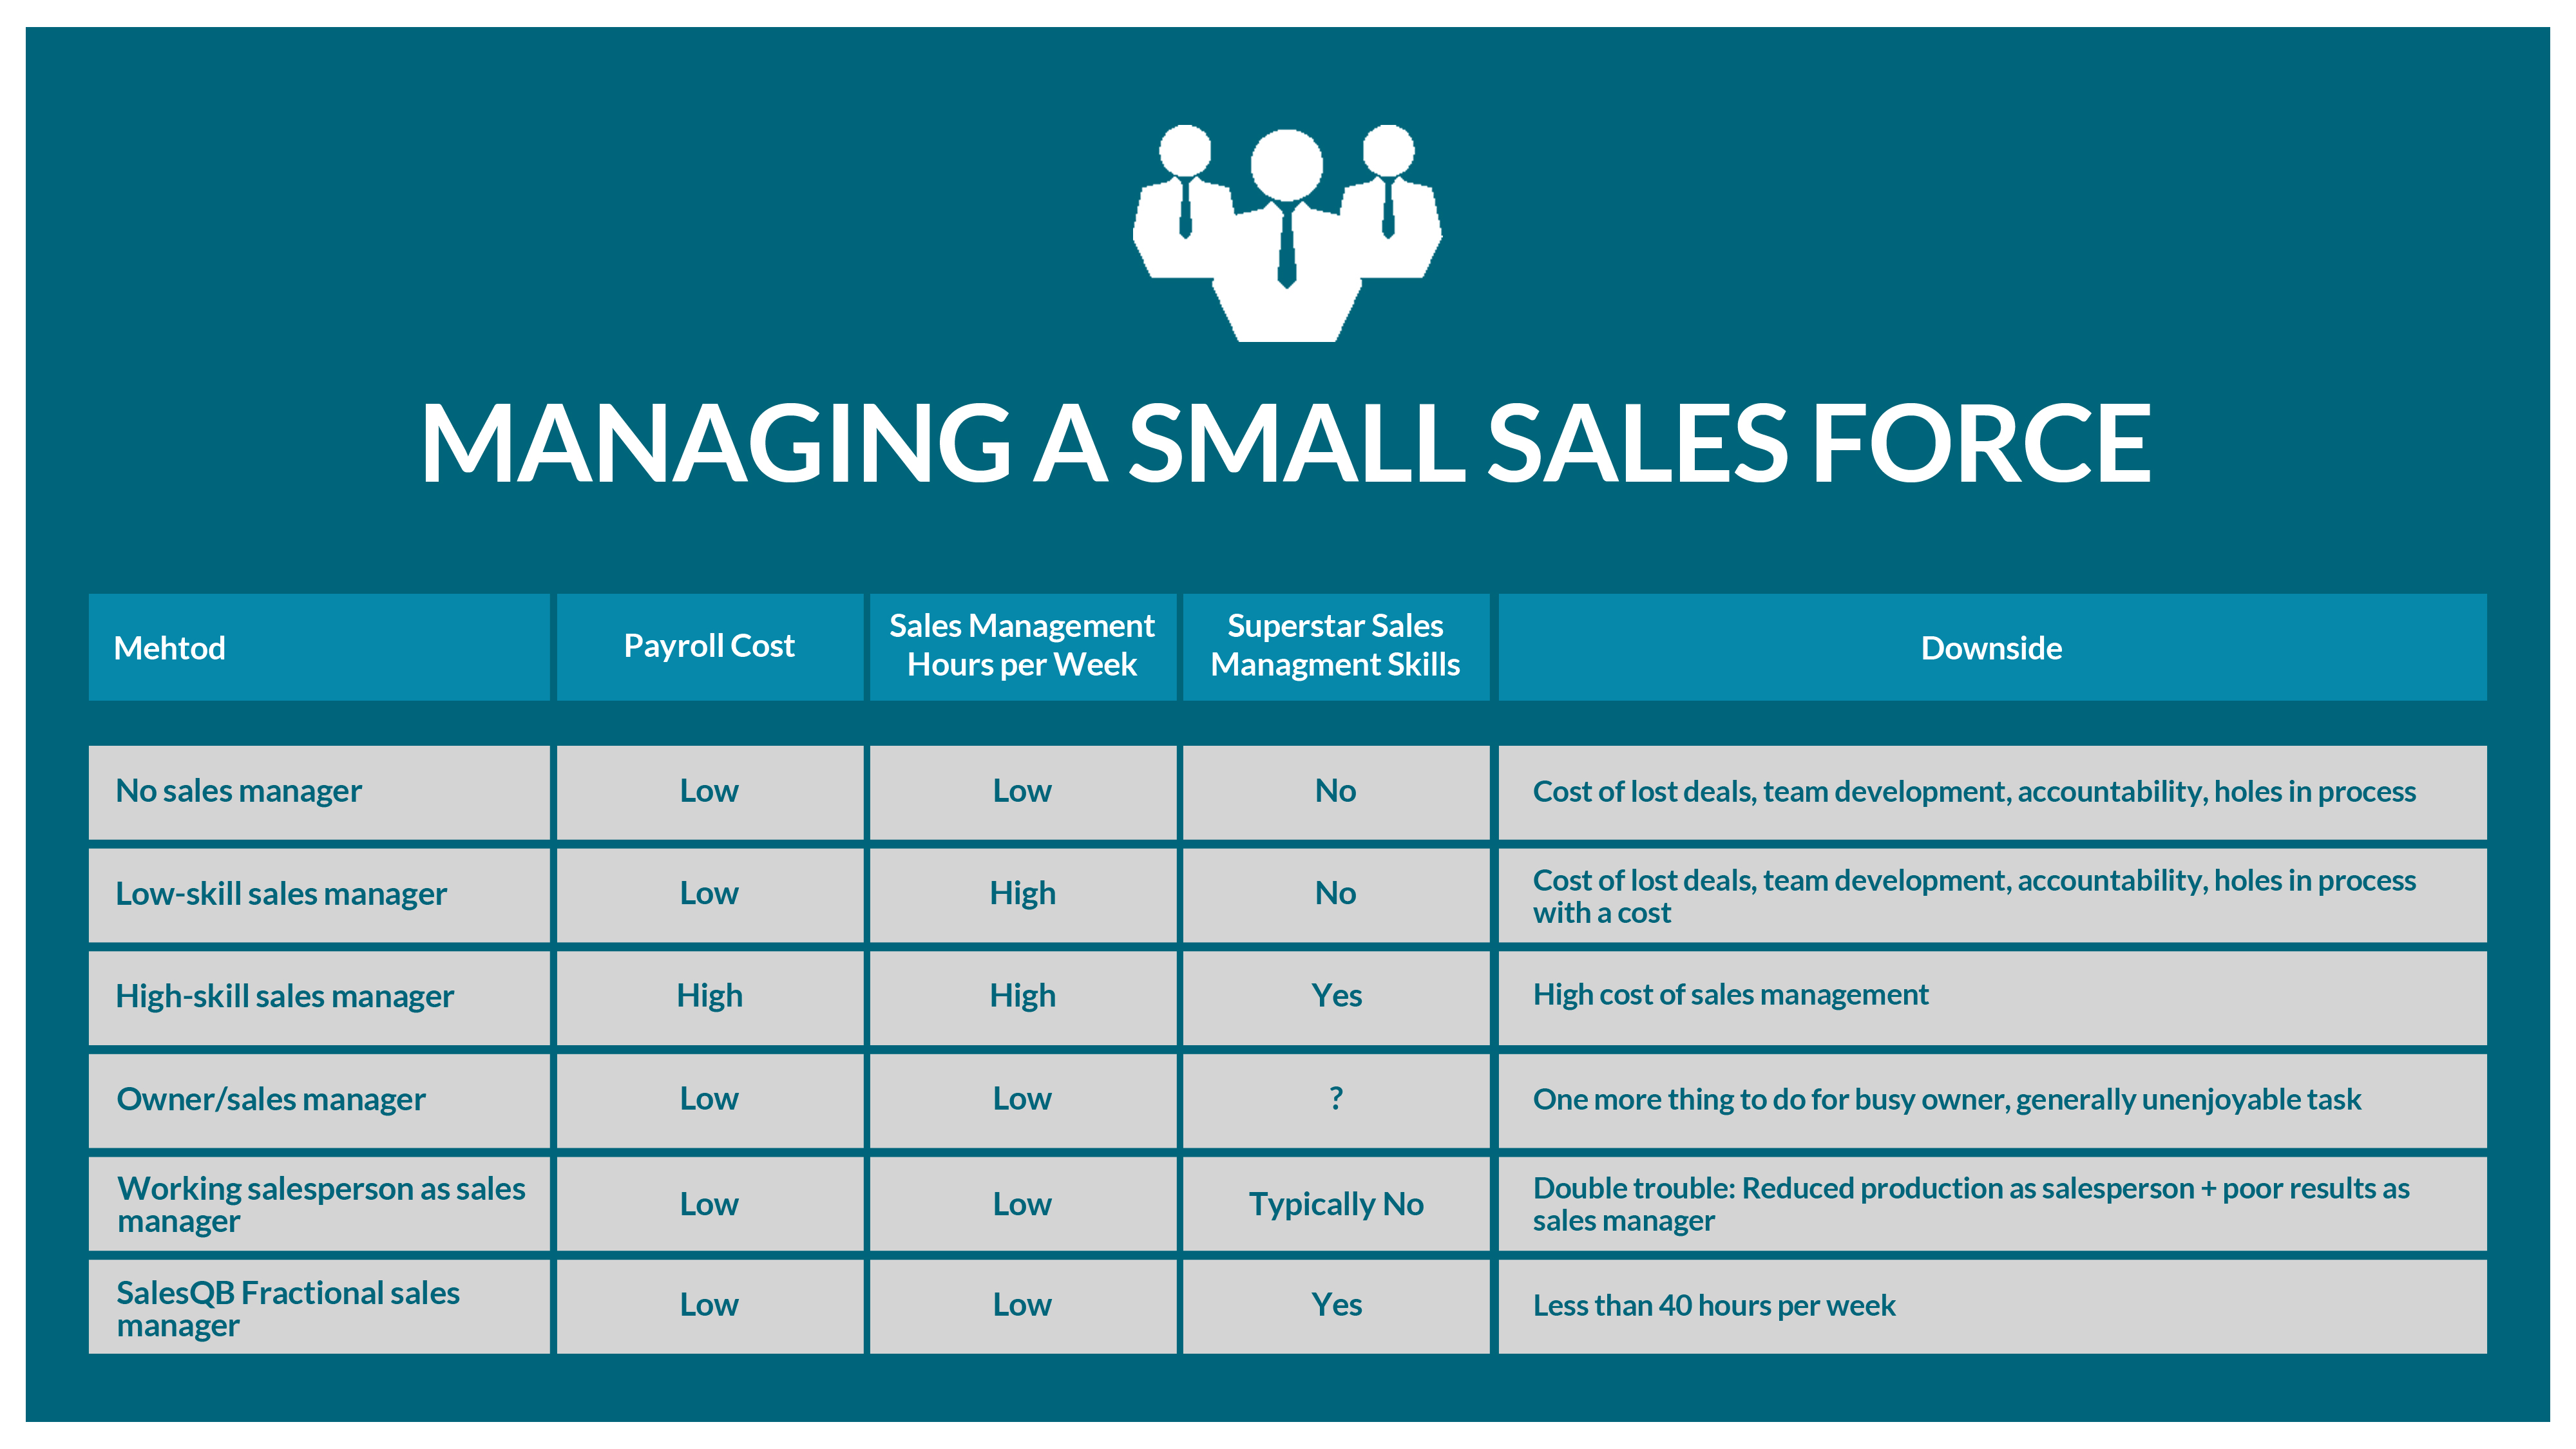 Comparison of Methods to Manage Small Sales Force